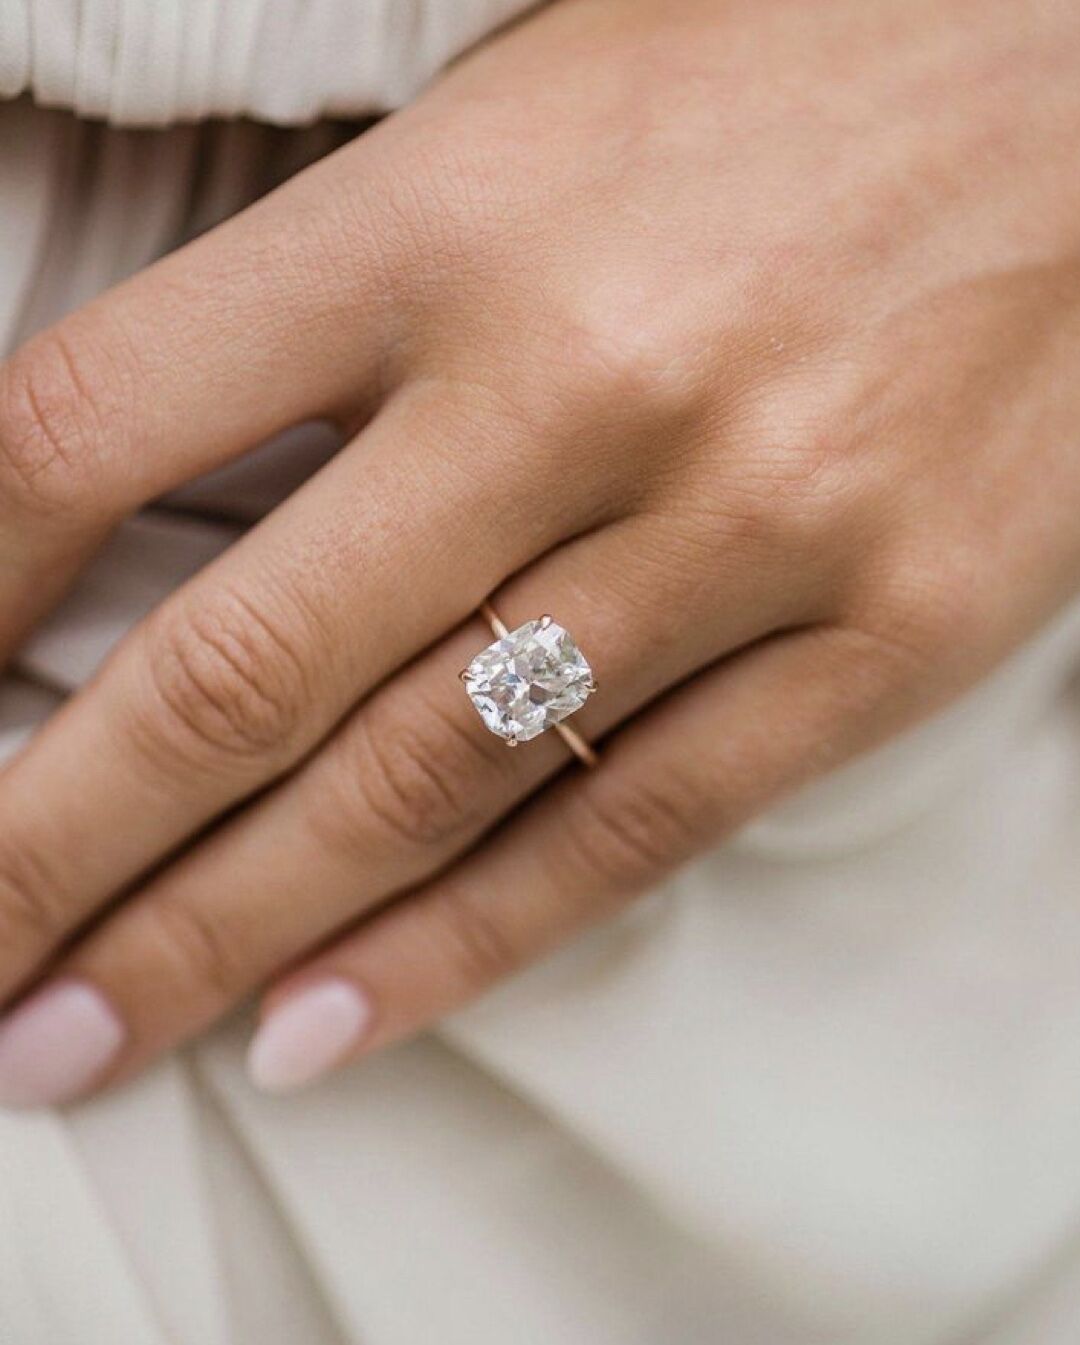 THE 8 BEST SOLITAIRE ENGAGEMENT RINGS FOR 2021